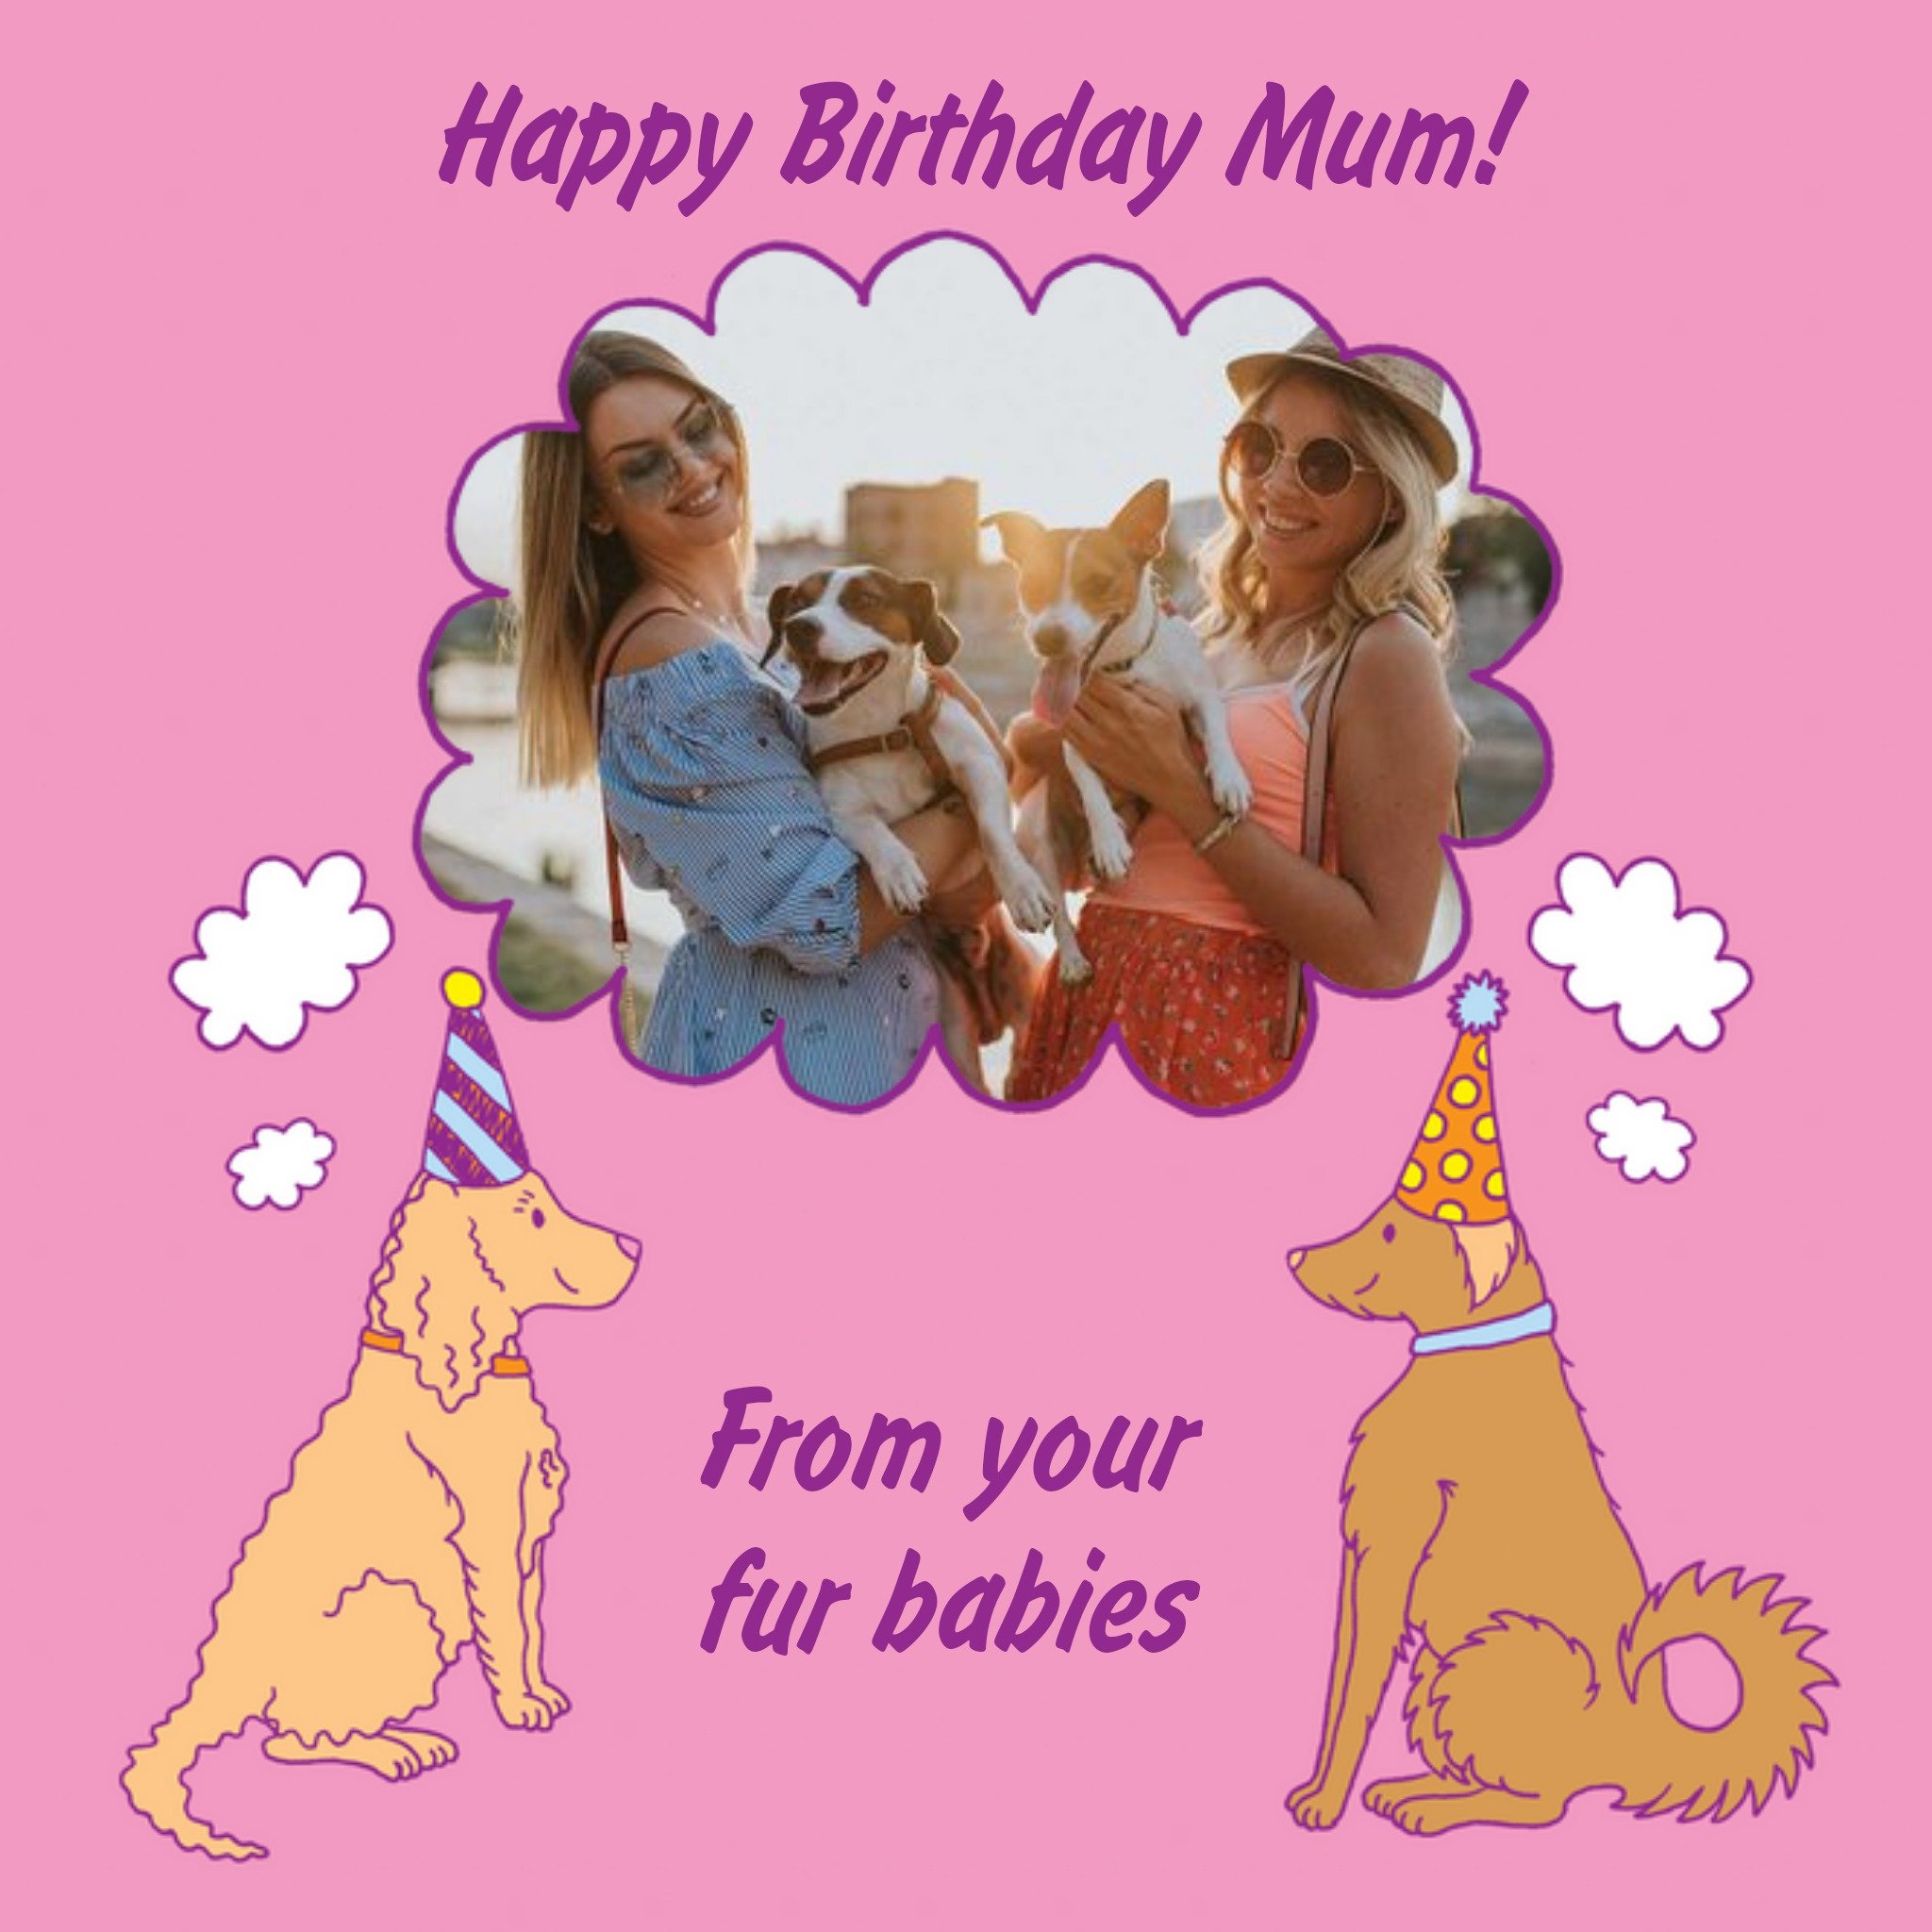 Moonpig From The Pets Fur Babies Photo Upload Birthday Card For Mum, Square